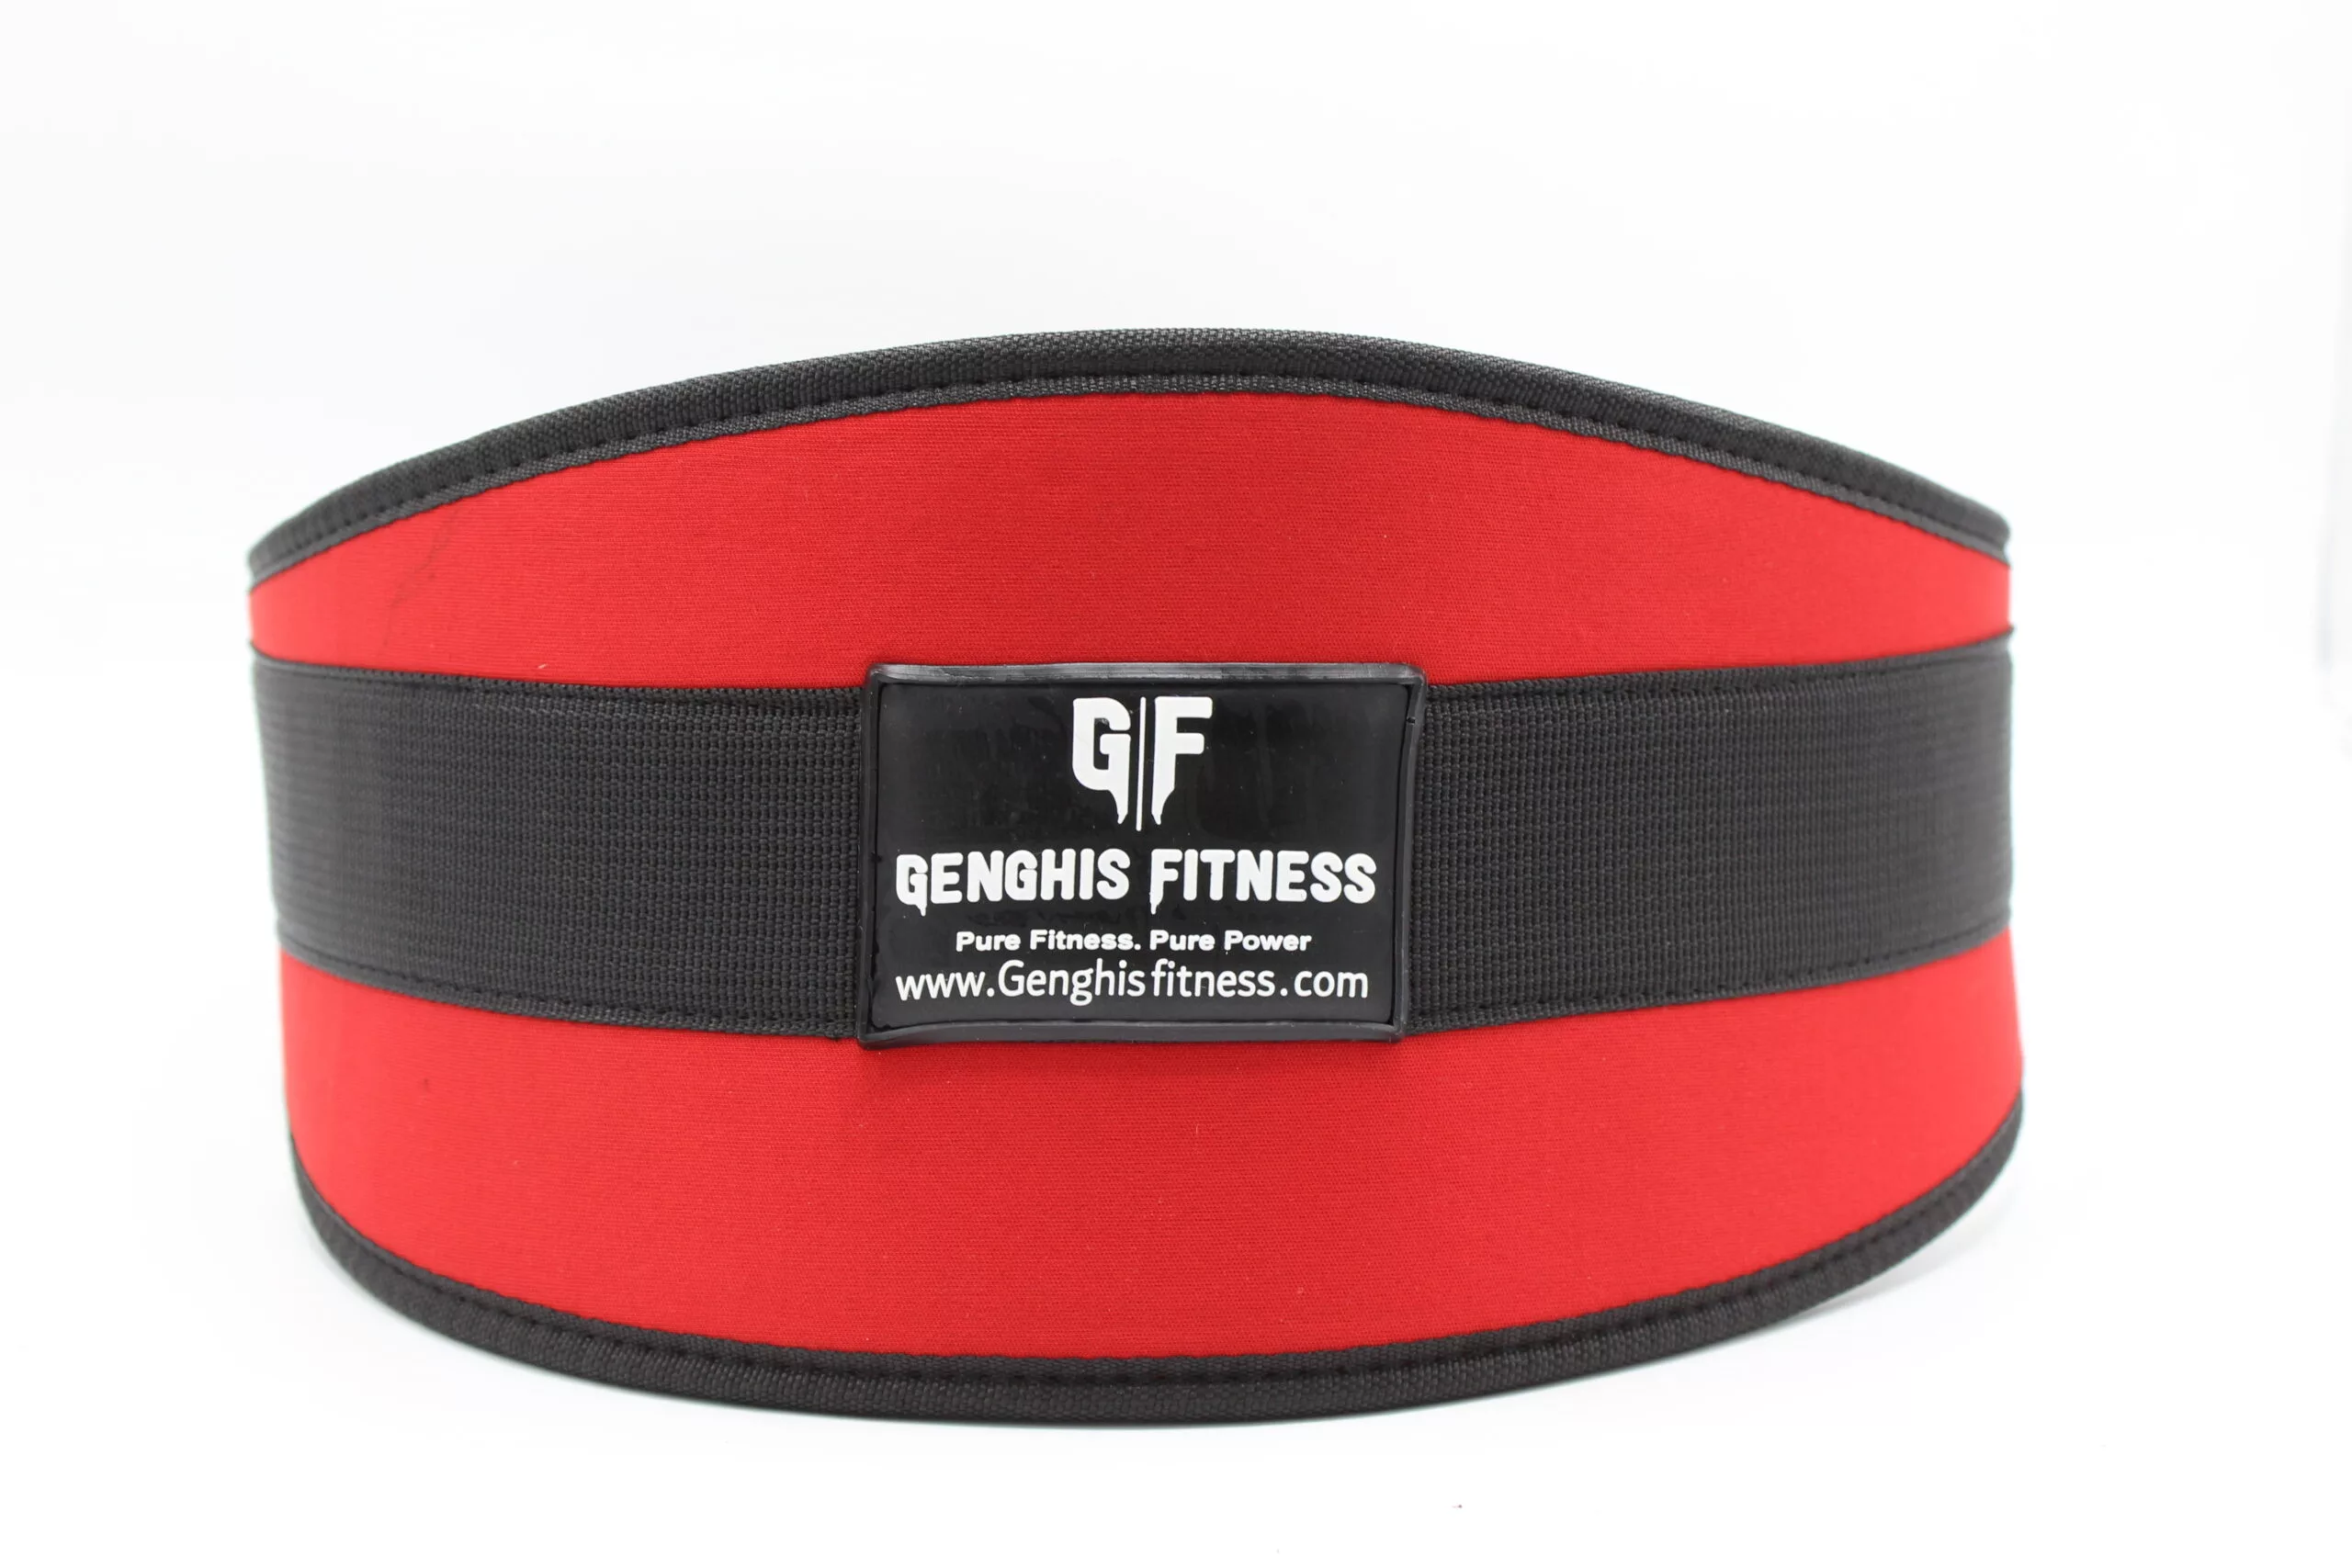 The Weight Lifting Belt